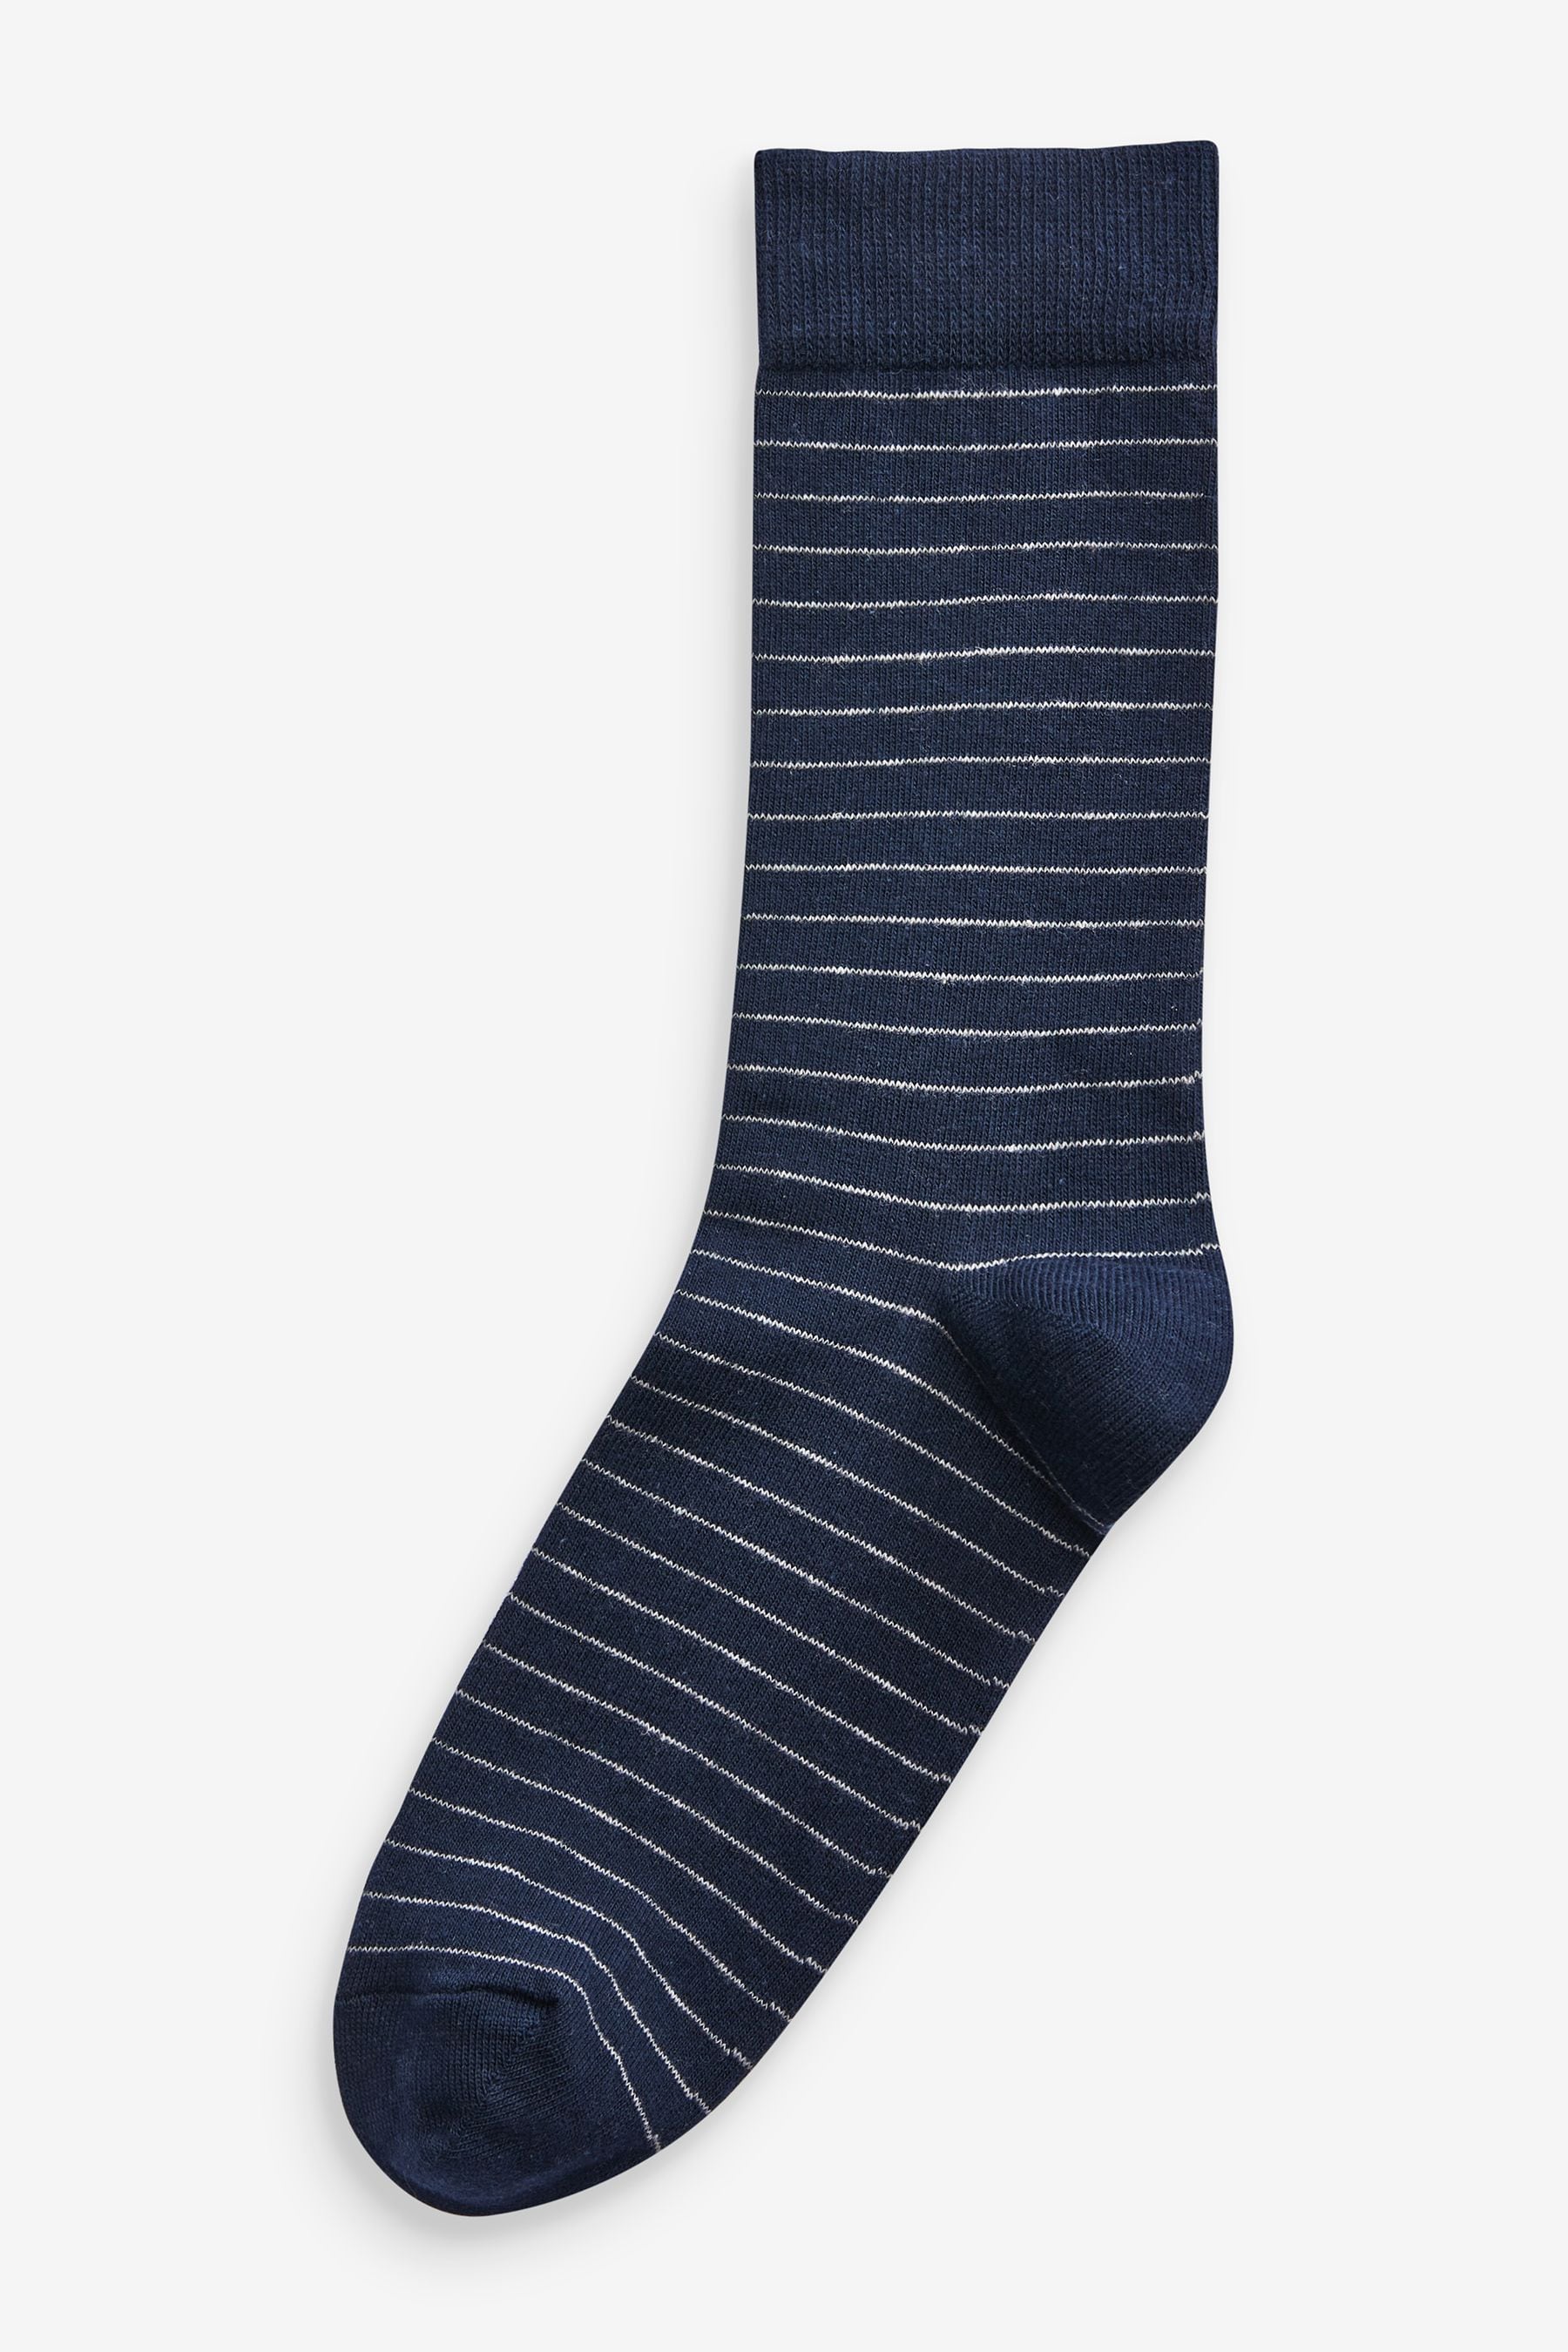 Buy Navy/Grey Pattern 7 Pack Mens Cotton Rich Socks from the Next UK ...